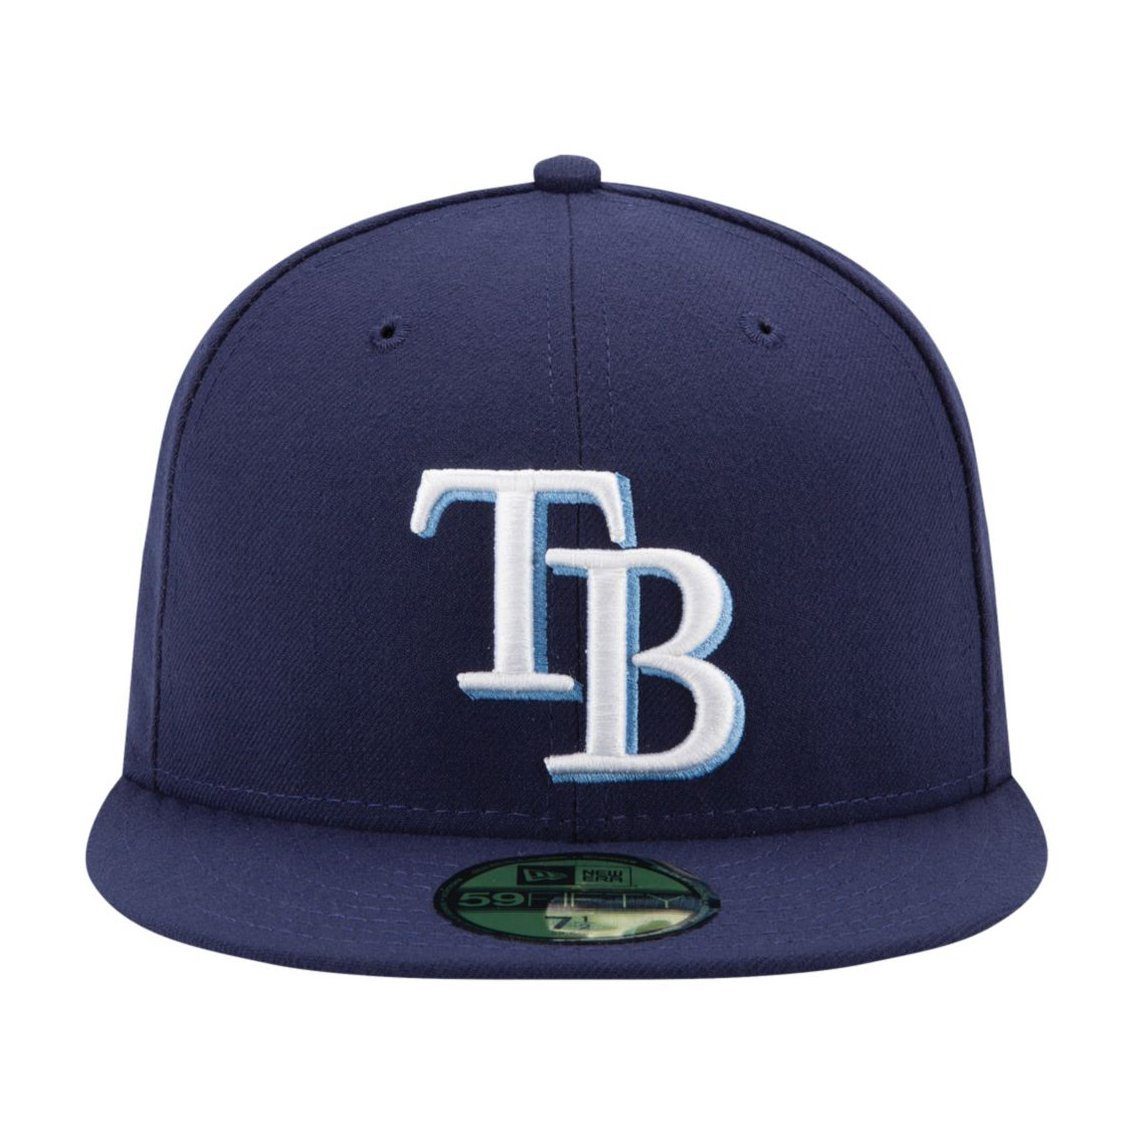 Herren Caps New Era Fitted Cap 59Fifty AUTHENTIC ONFIELD Tampa Bay Rays